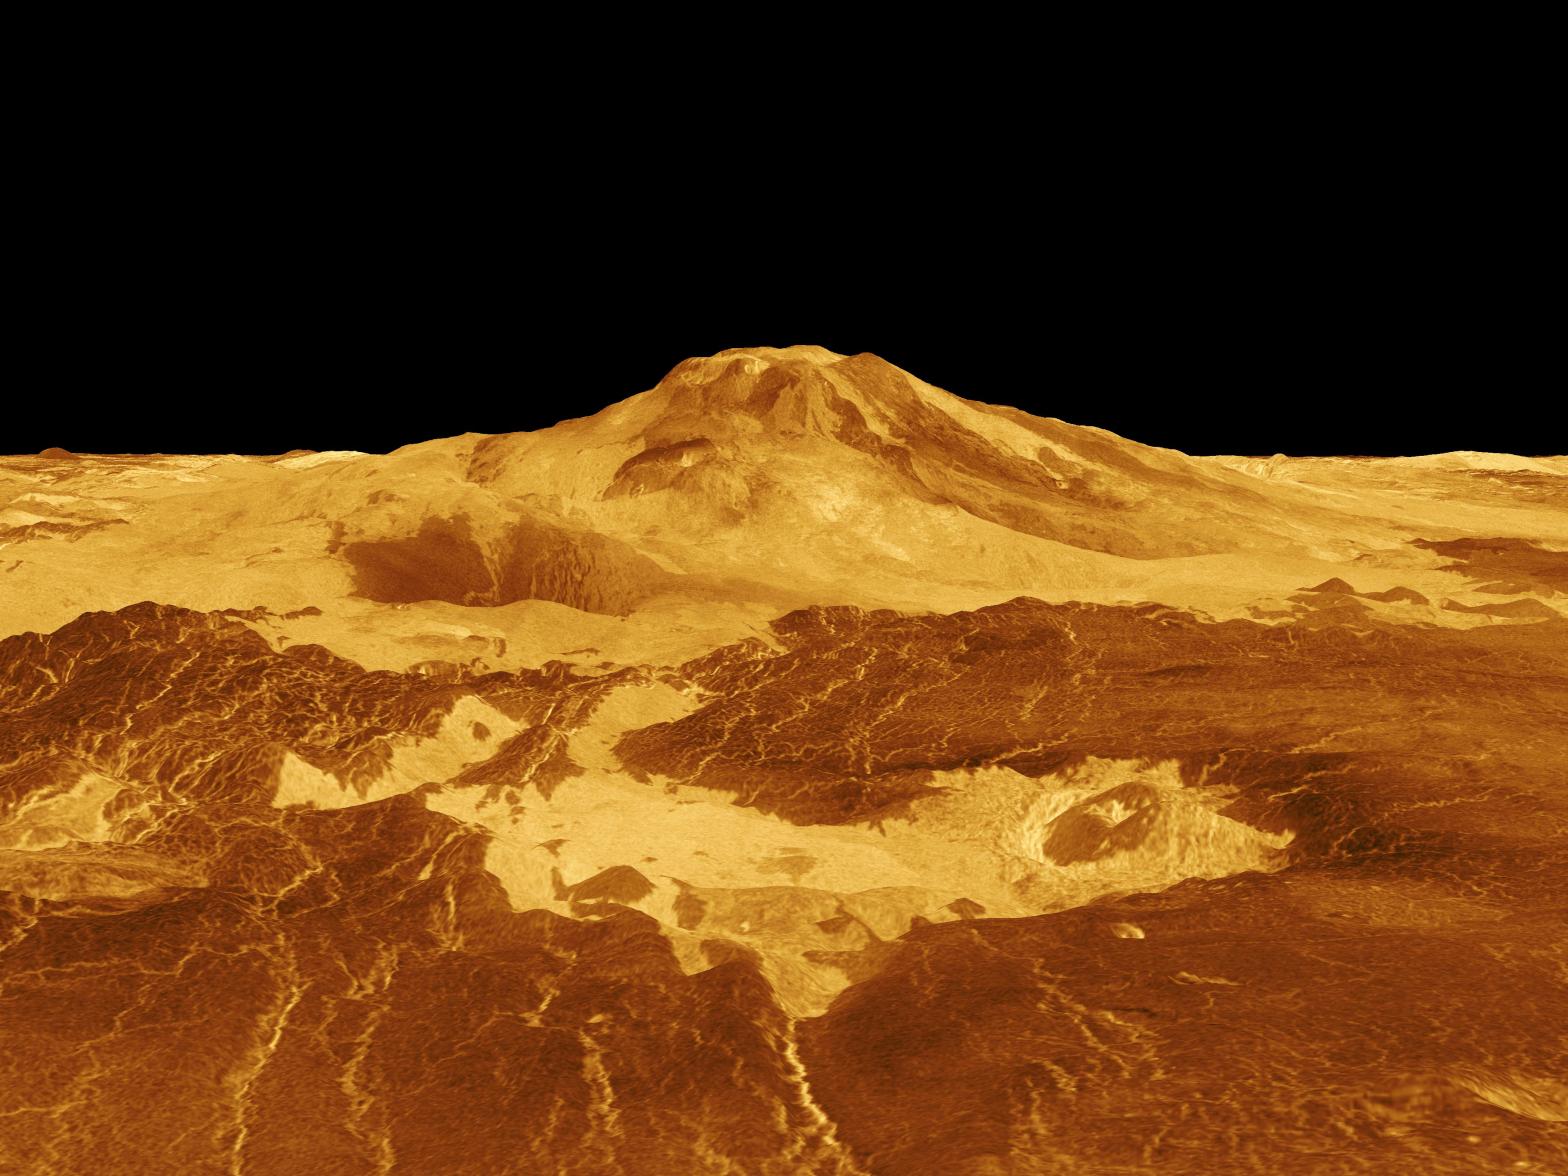 A volcano towers over its surroundings, the terrain shown in false-color yellows and oranges.